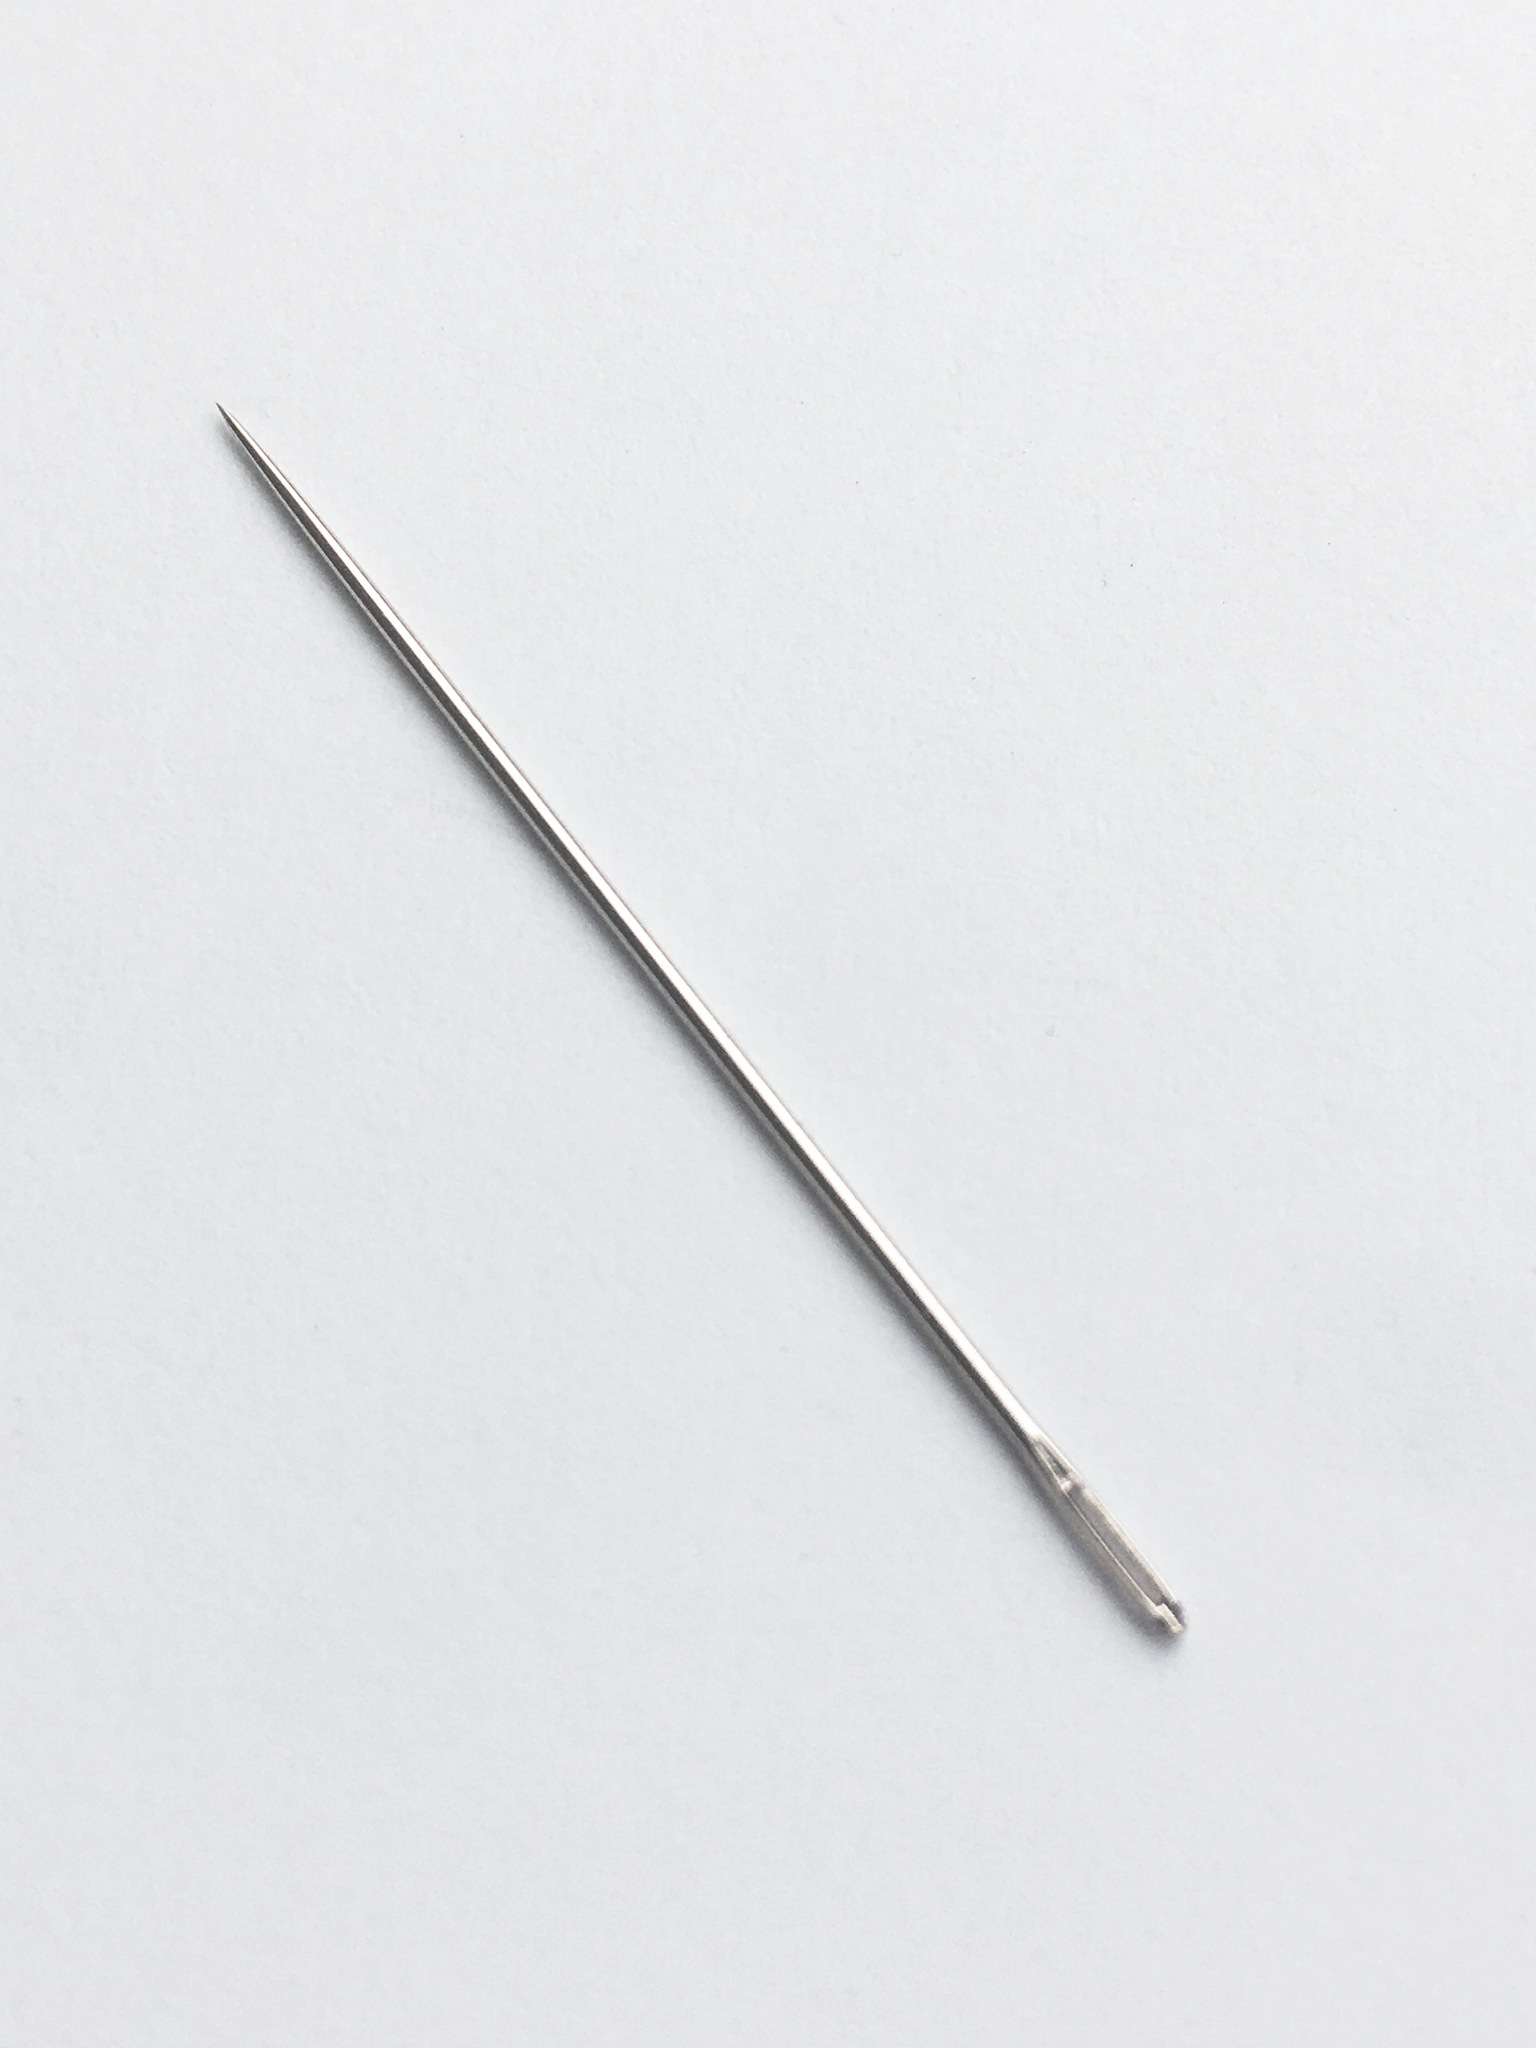 Embroidery Needles ∣ Sharpes Needles with long eye – toolly